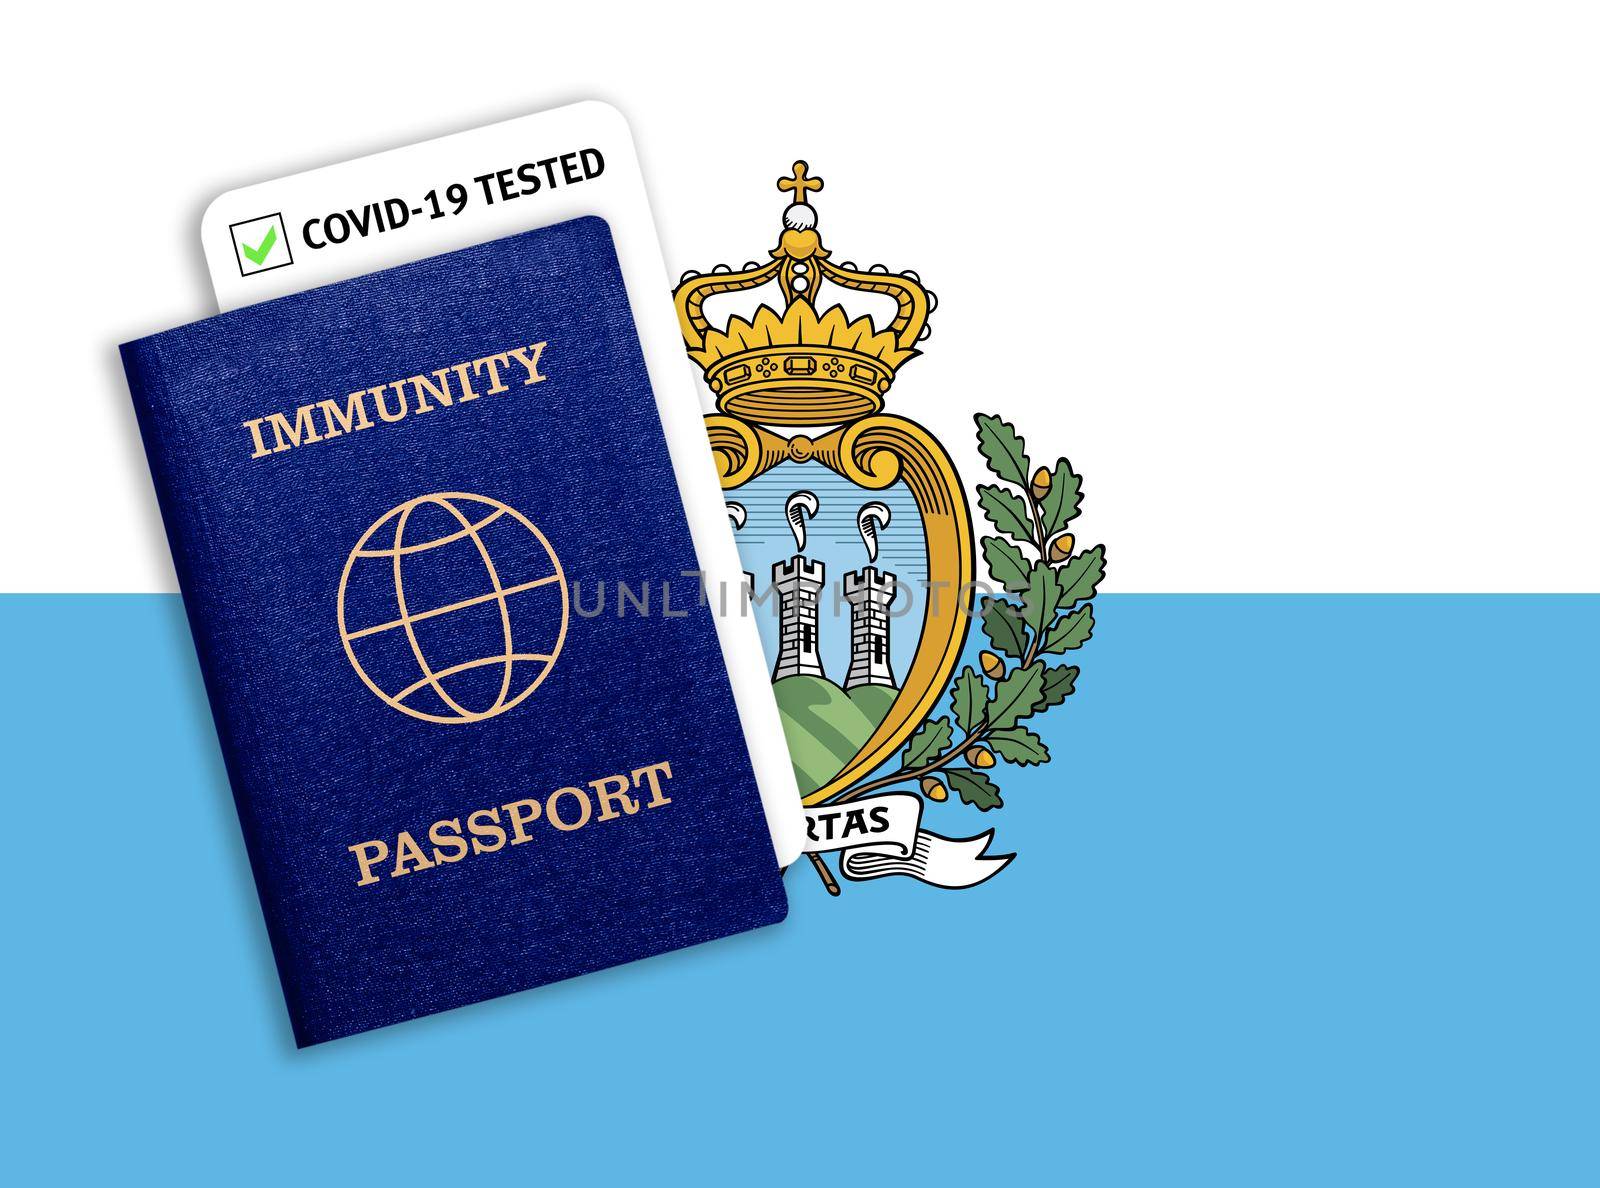 Concept of Immunity passport, certificate for traveling after pandemic for people who have had coronavirus or made vaccine and test result for COVID-19 on flag of San Marino